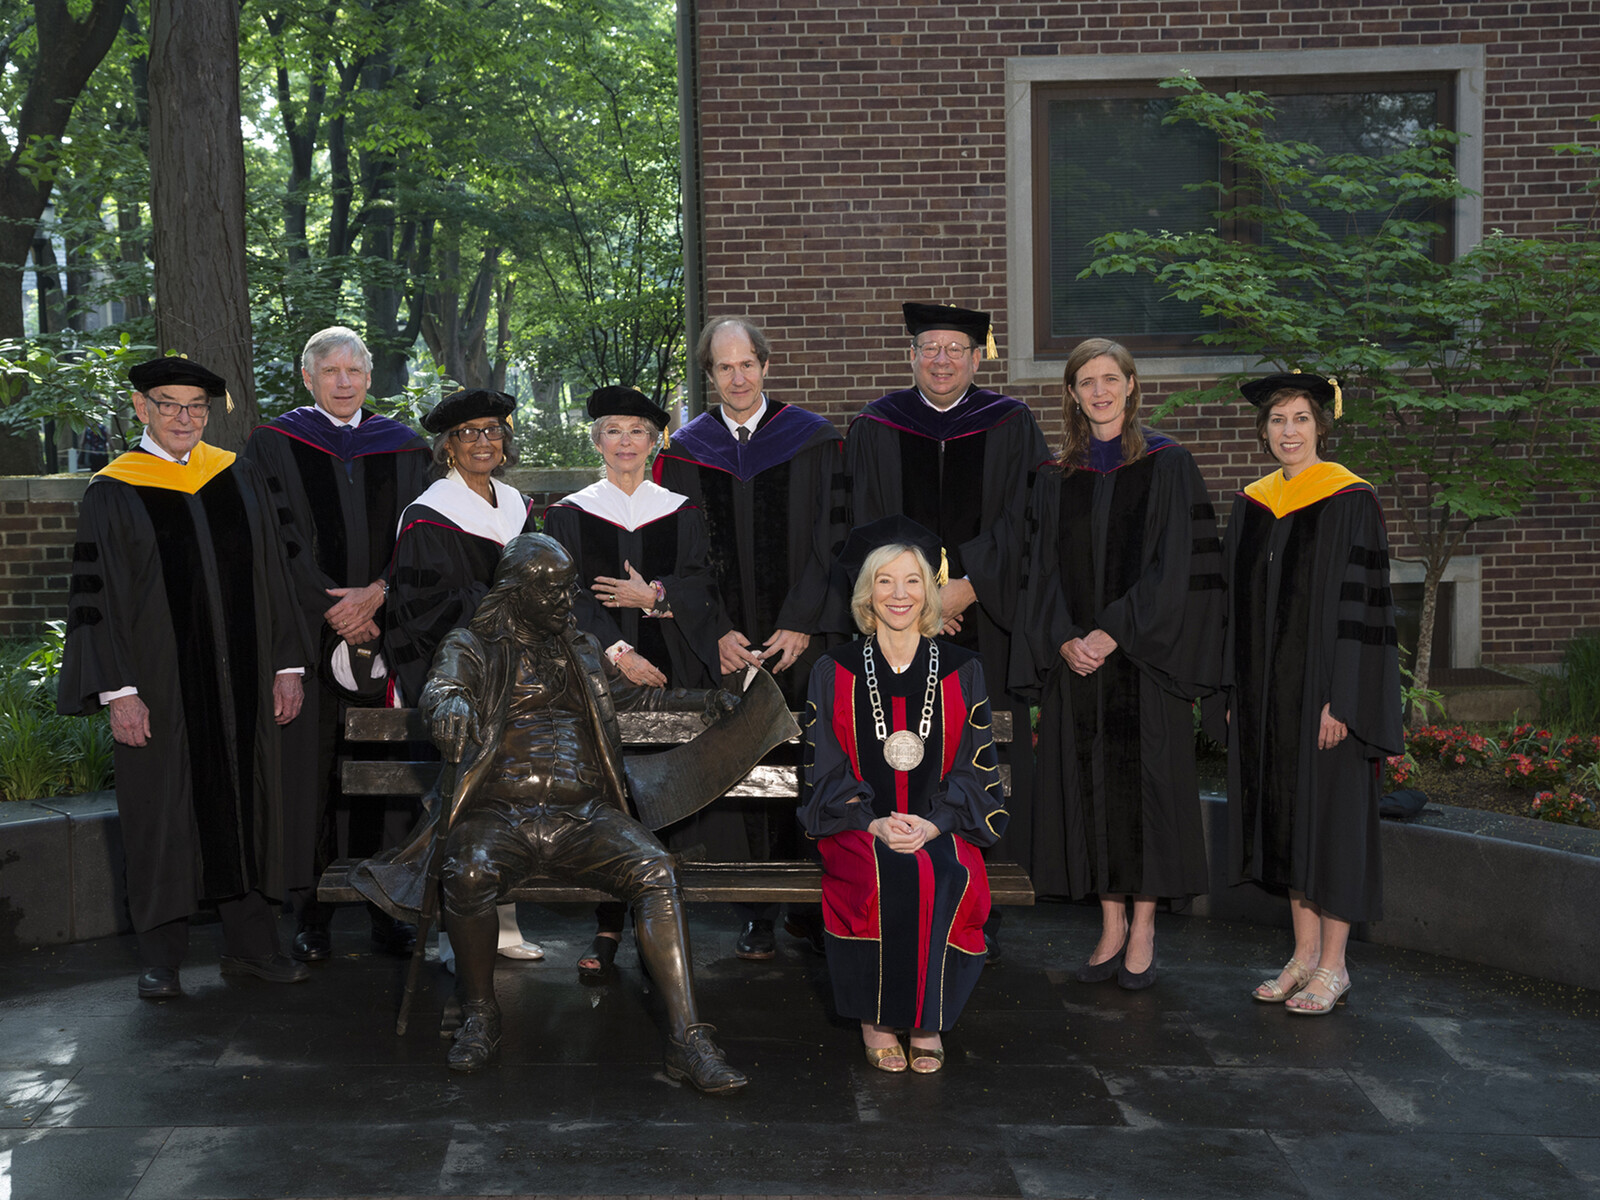 2015 Penn, Amy Gutmann and honorary degree recipients in regalia